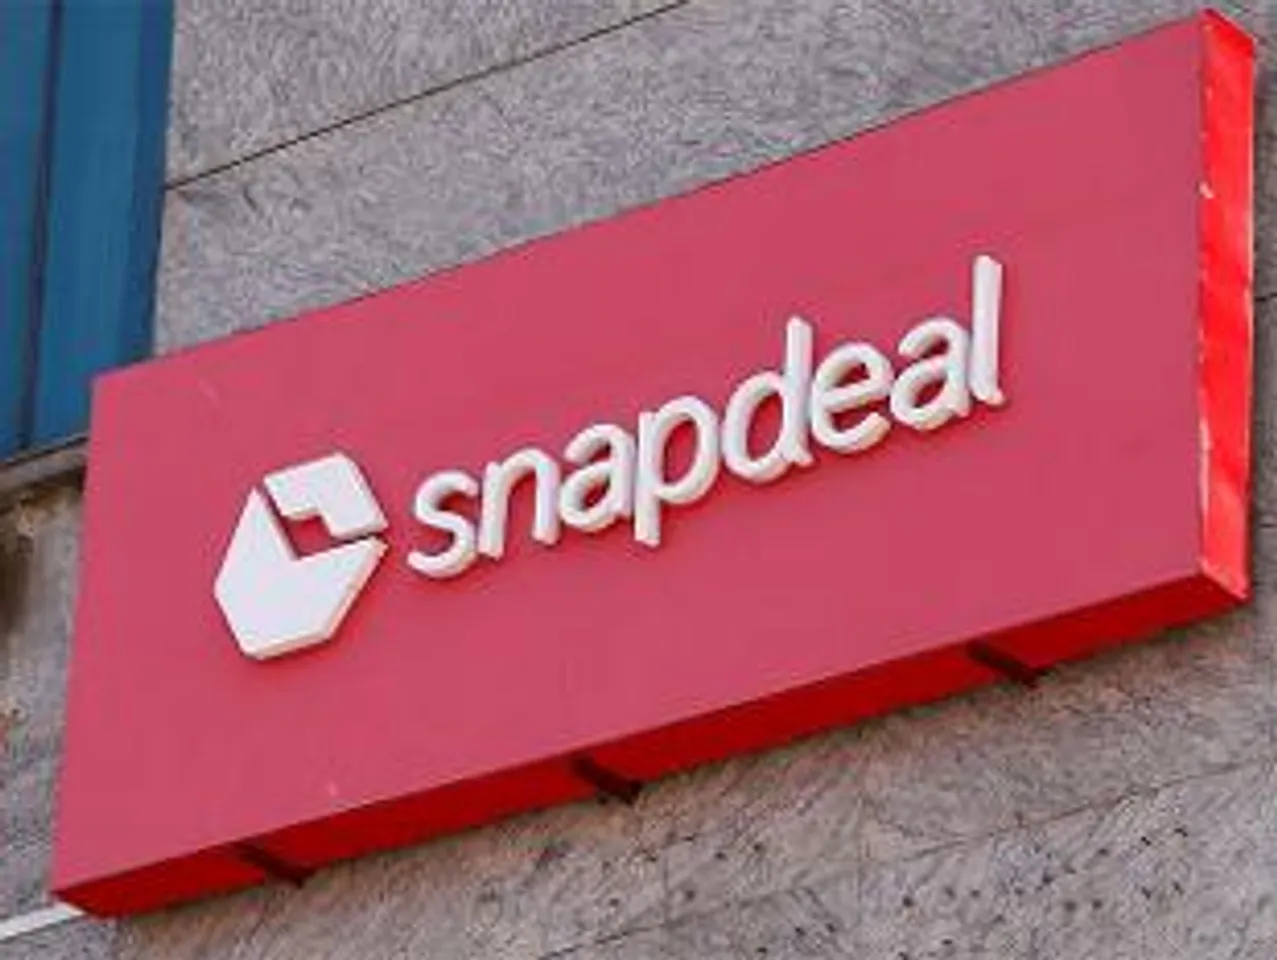 Softbank supports Snapdeal 2.0 as discussion fails with Flipkart